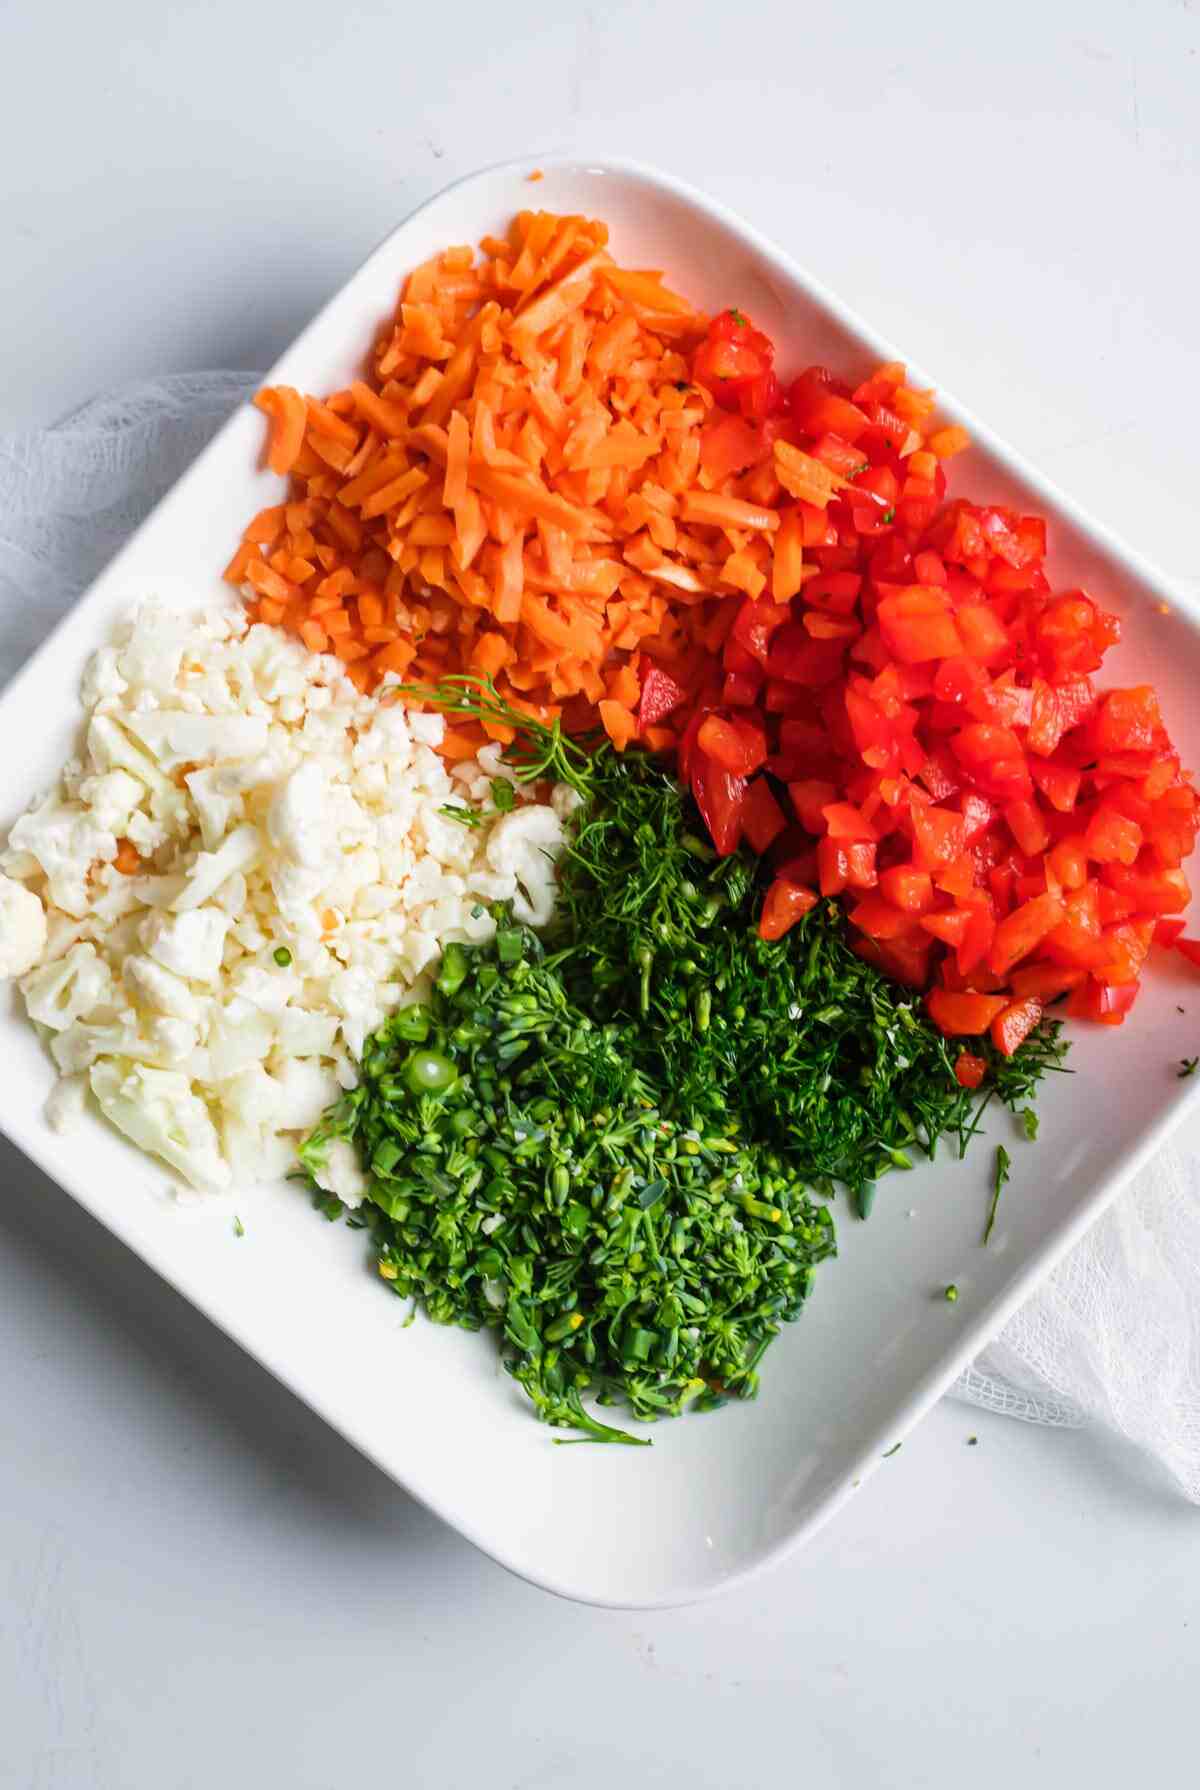 chopped vegetables on a plate ready to be added to the pinwheel filling mixture